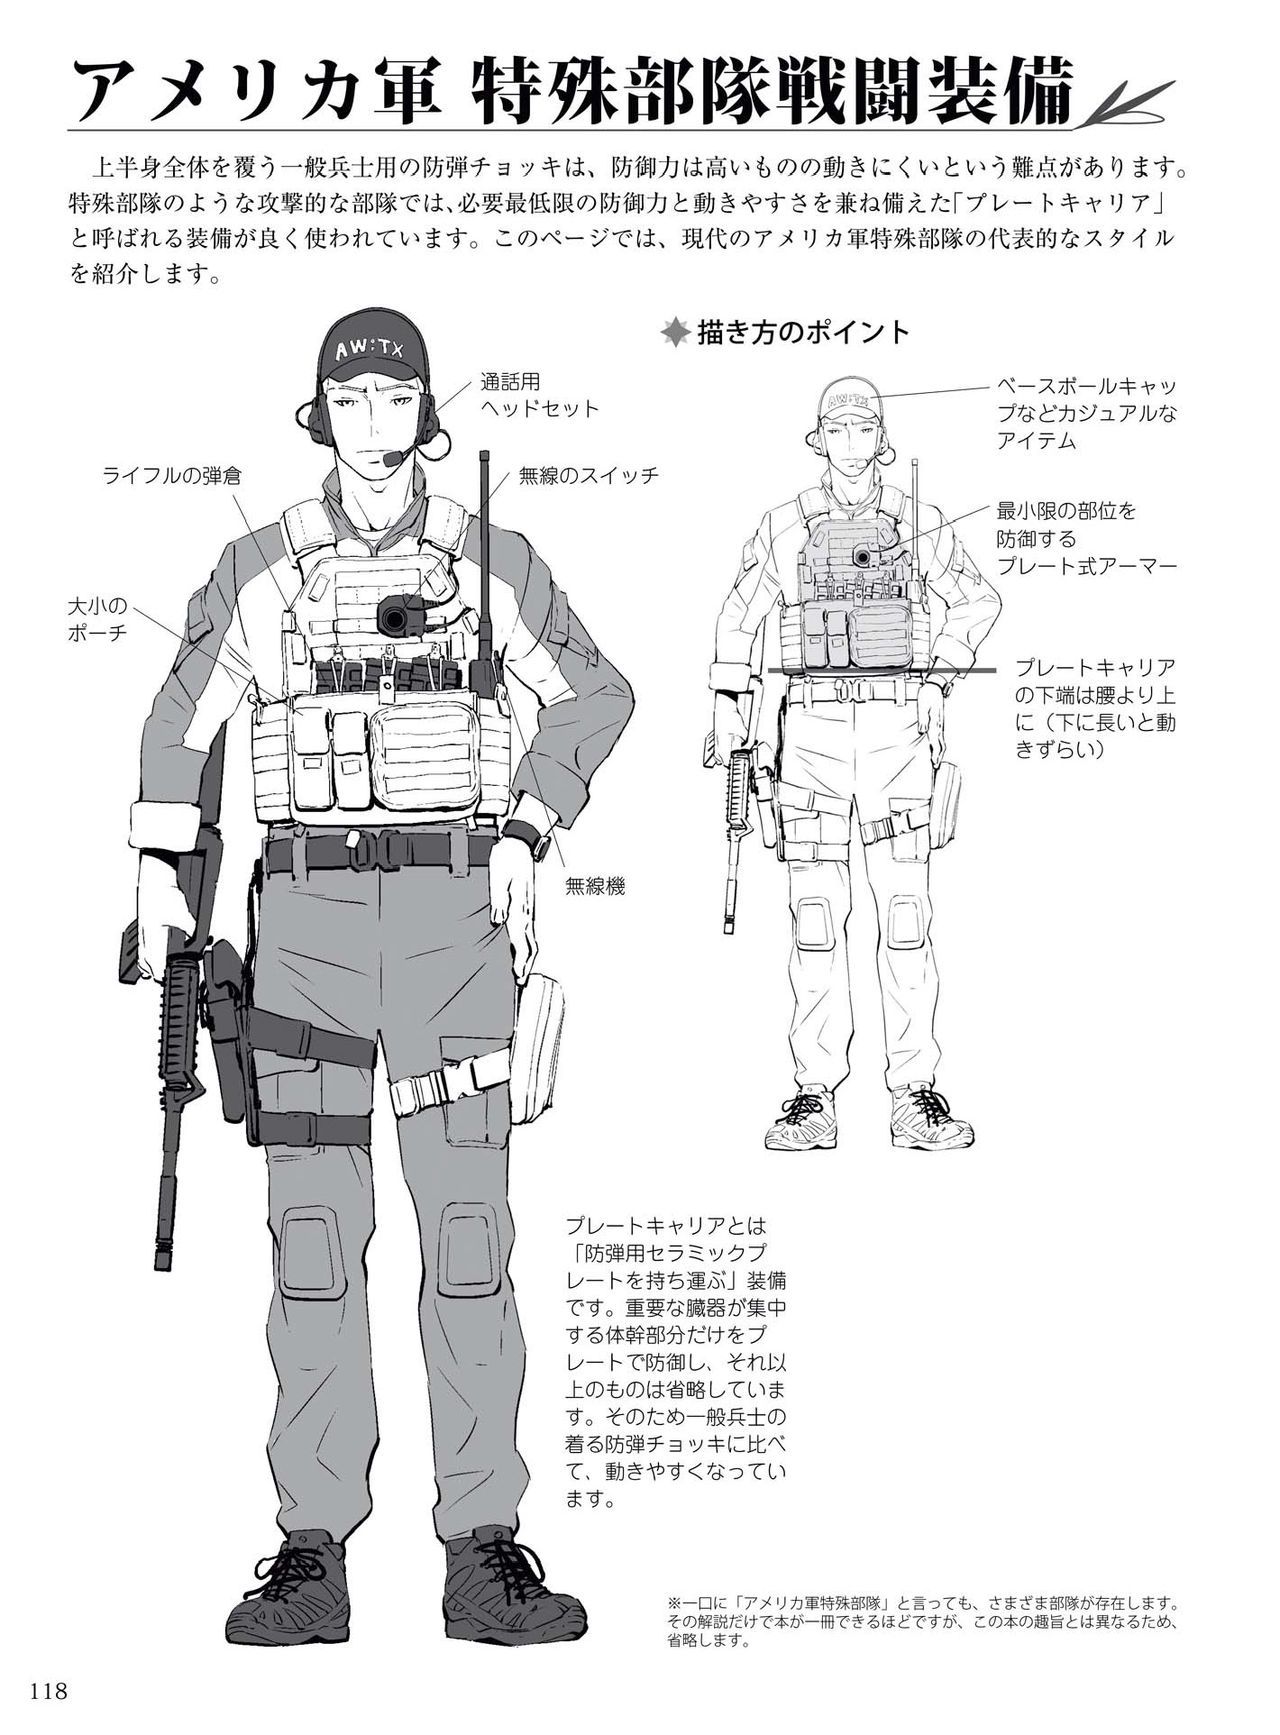 How to draw military uniforms and uniforms From Self-Defense Forces 軍服・制服の描き方 アメリカ軍・自衛隊の制服から戦闘服まで 121